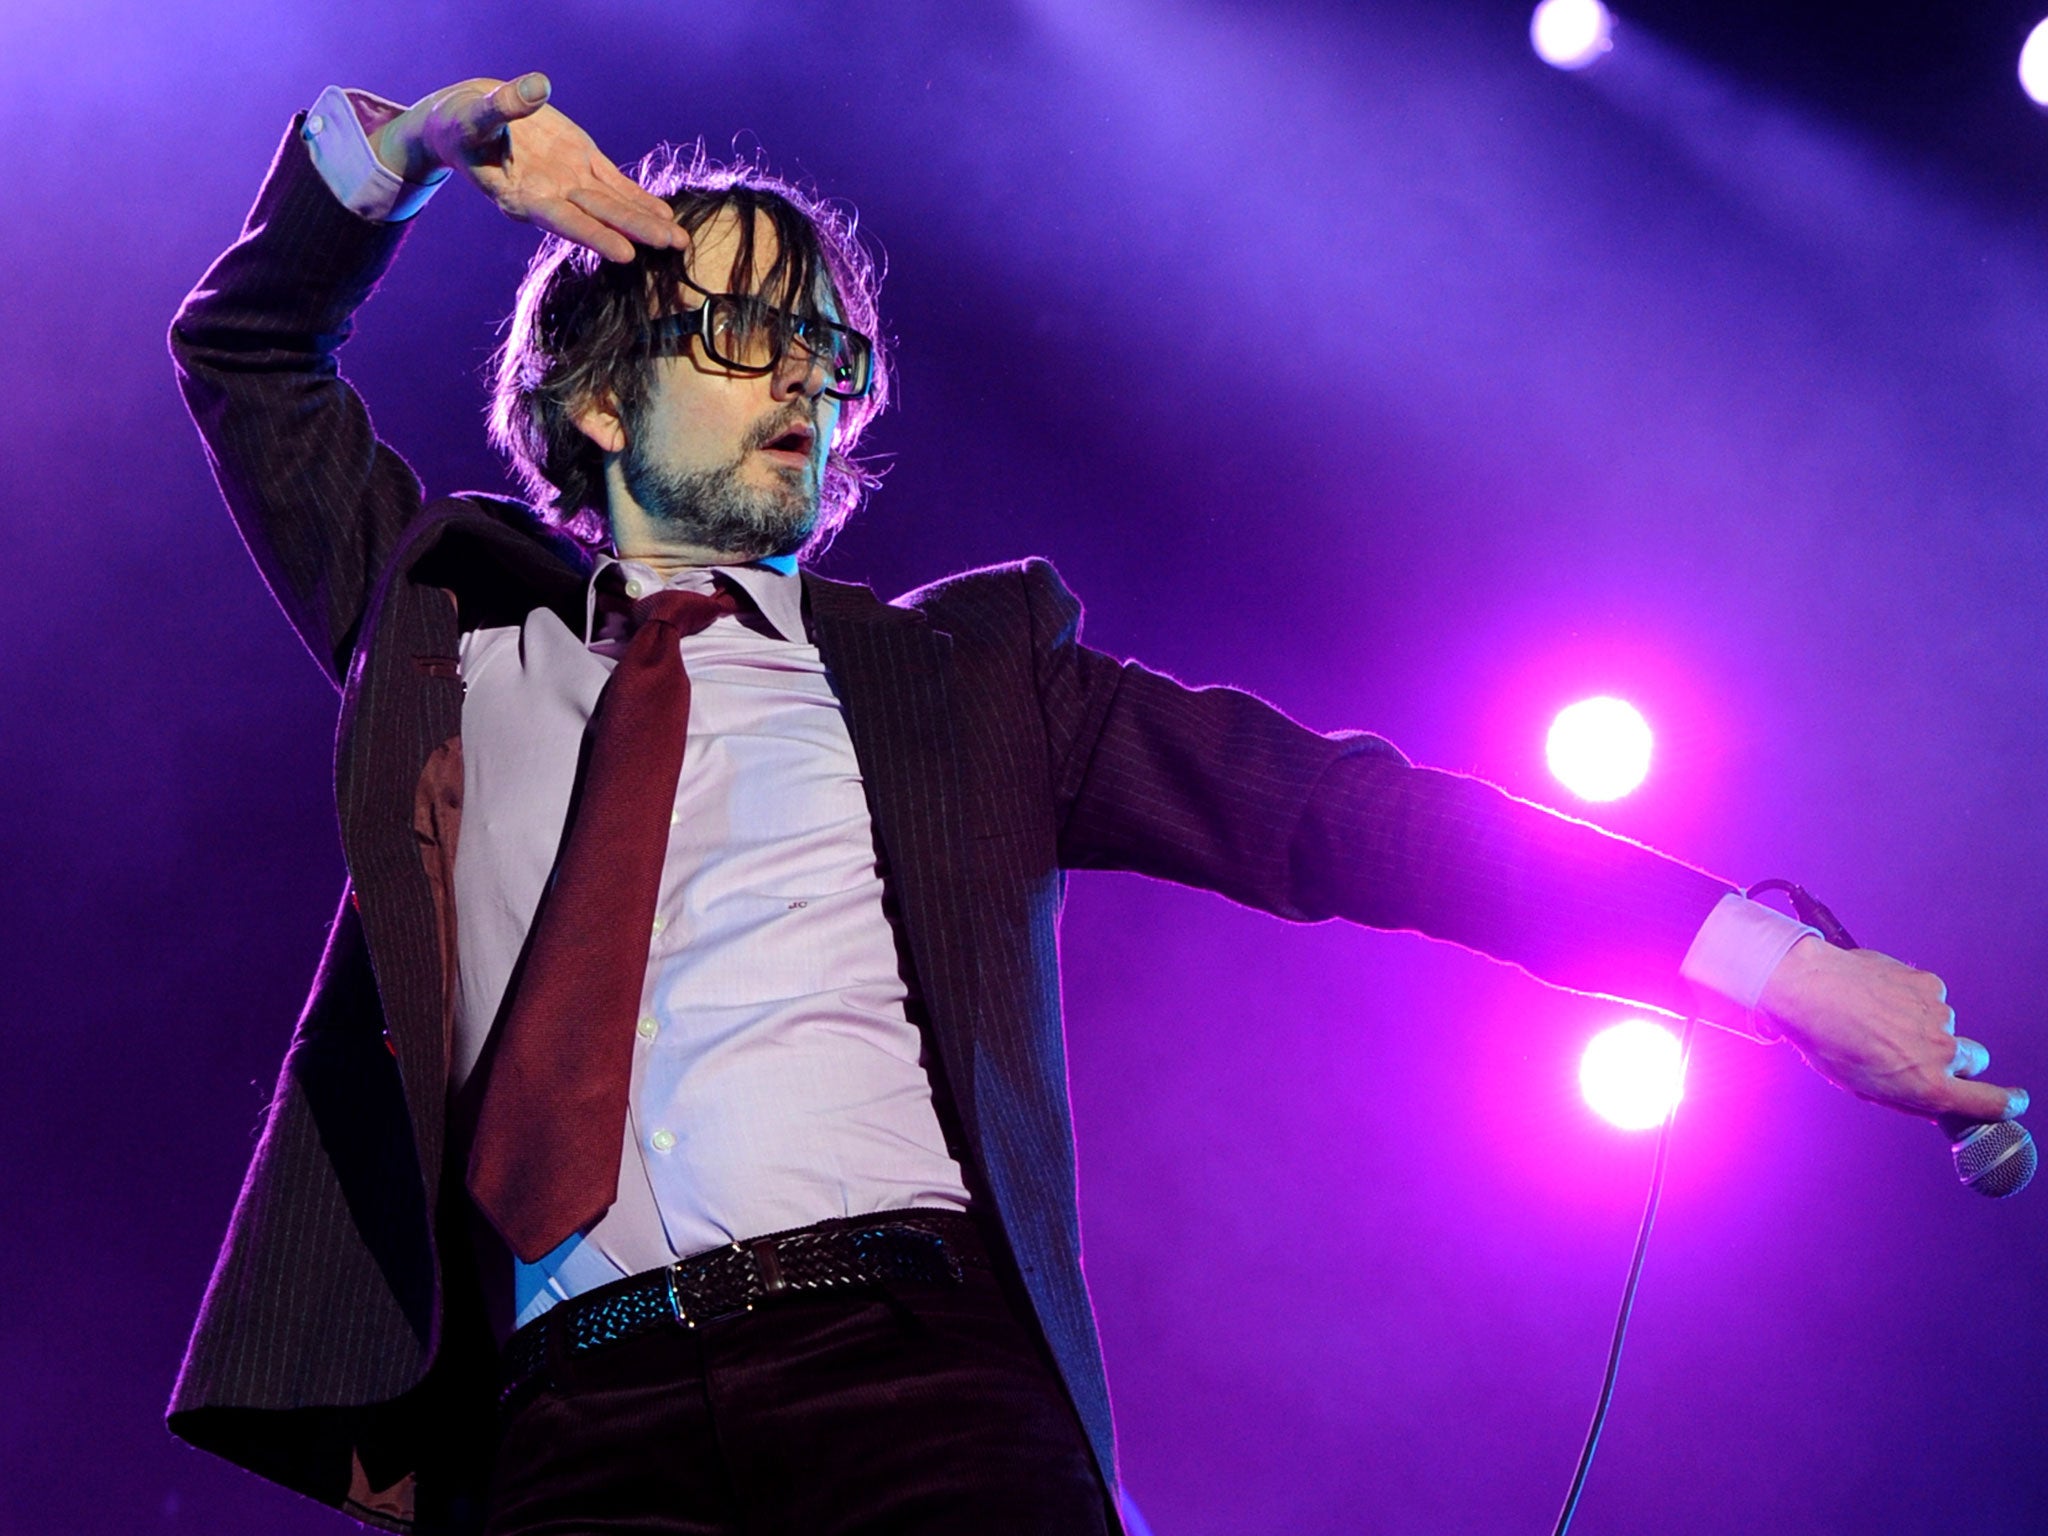 Singer Jarvis Cocker of Pulp performs onstage during the 2012 Coachella Festival on April 13, 2012 in Indio, California.